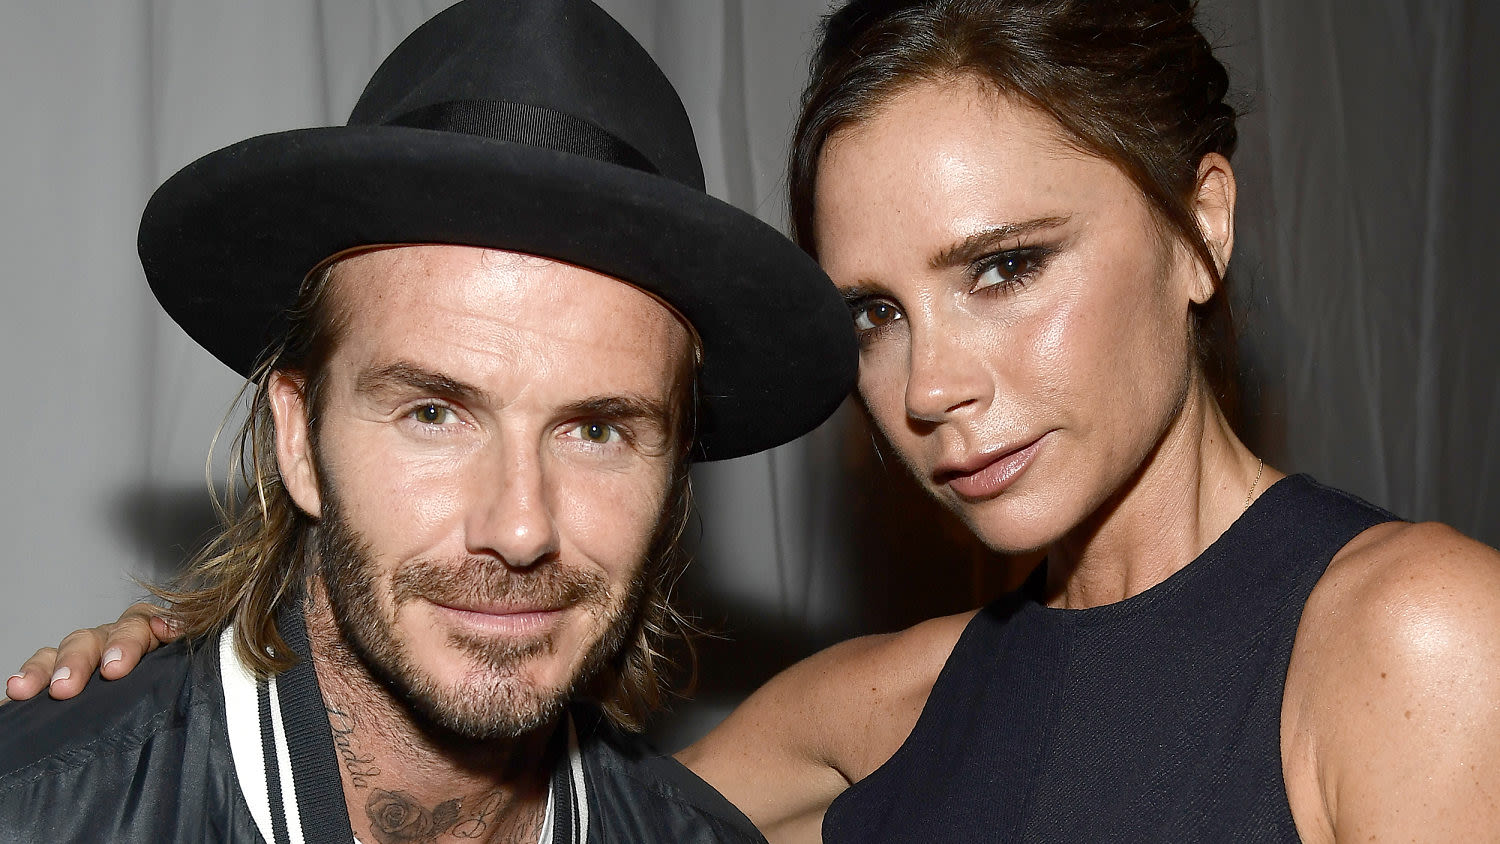 David and Victoria Beckham's relationship timeline, in their own words